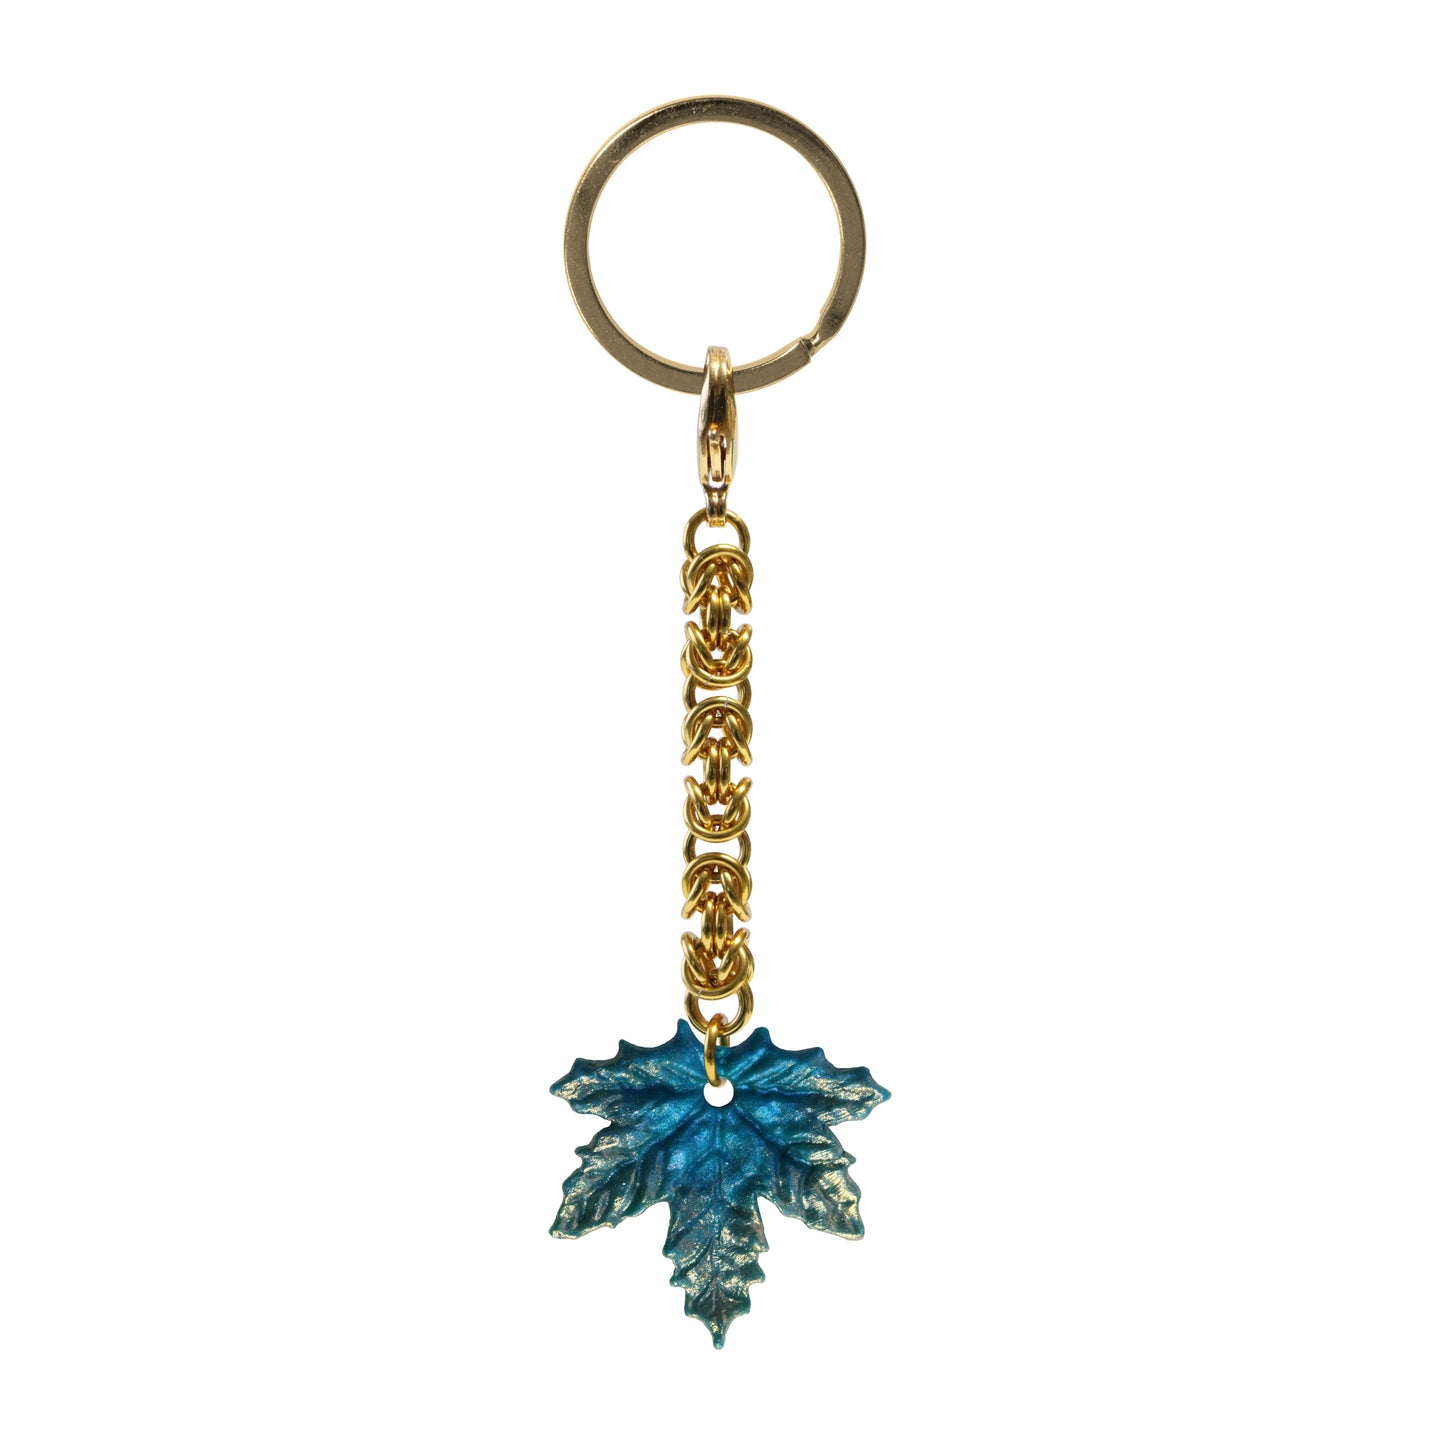 Maple Leaf Keychain / 100mm length / choose from 4 colorways